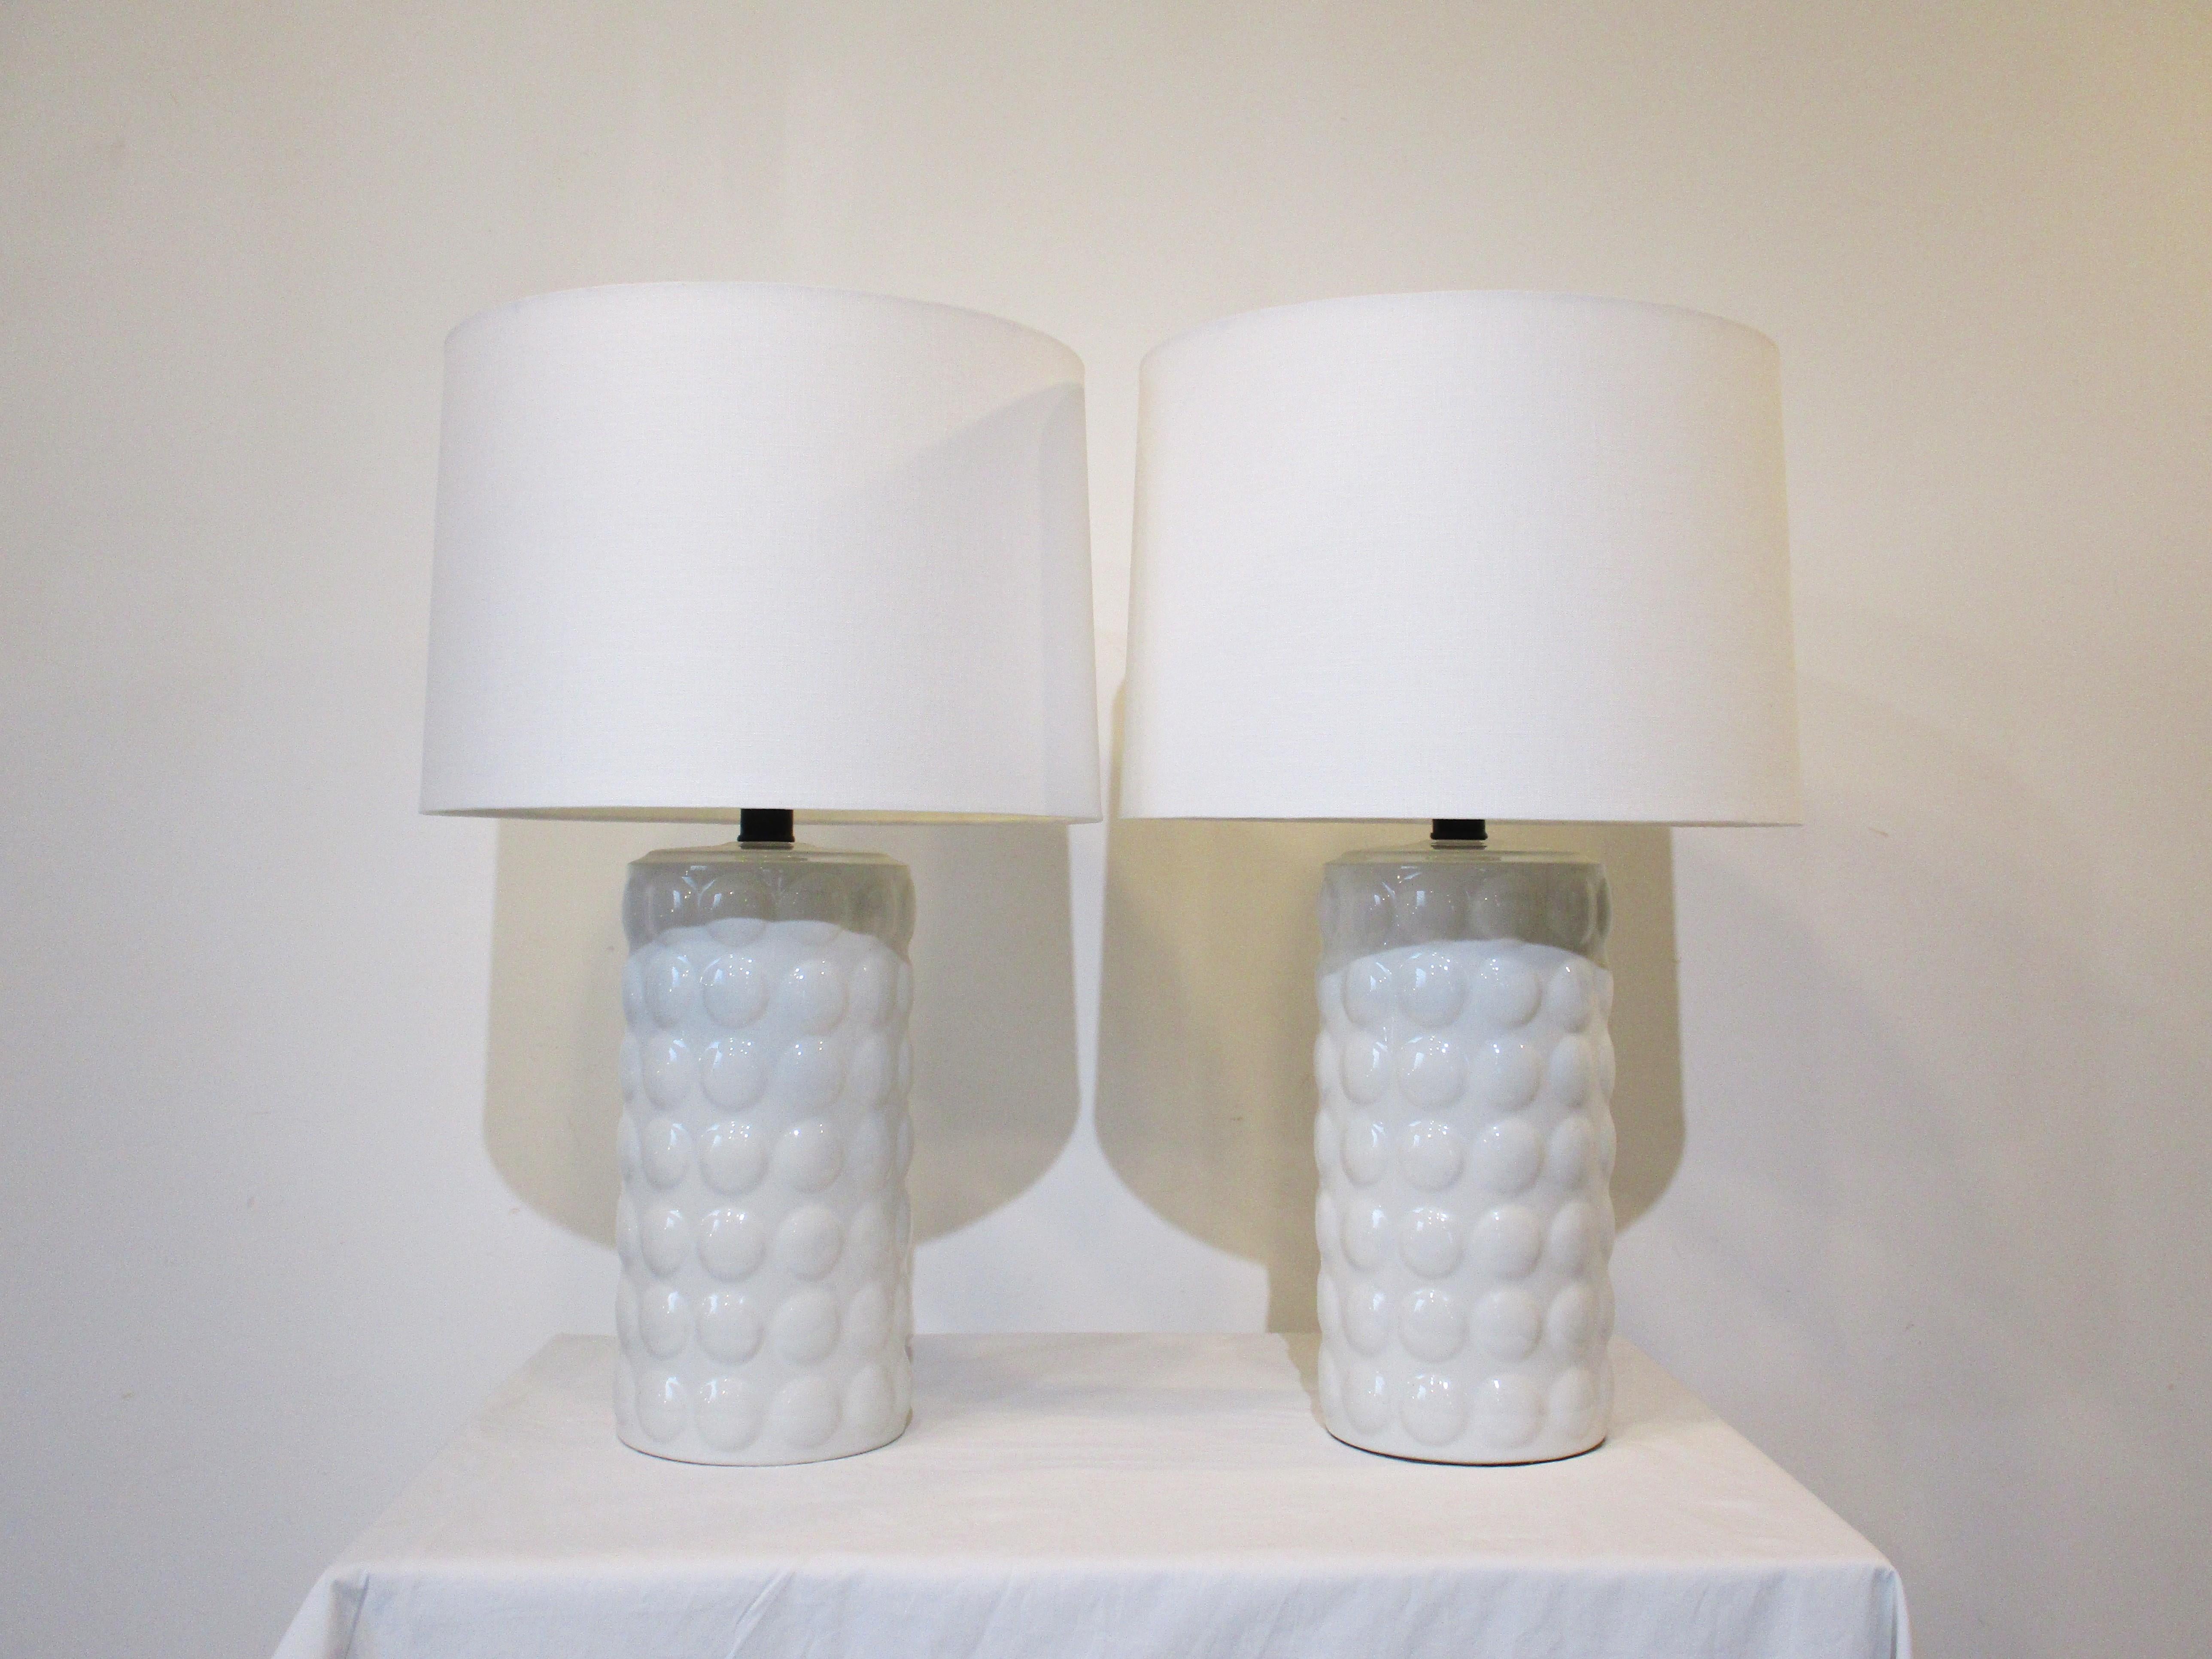 A wonderful pair of white ceramic table lamps with ball design to the bases and topped with cream linen shades . Manufactured in the manner of the Chapman Lighting company, very well crafted and has that simple but sophisticated rich look and feel.